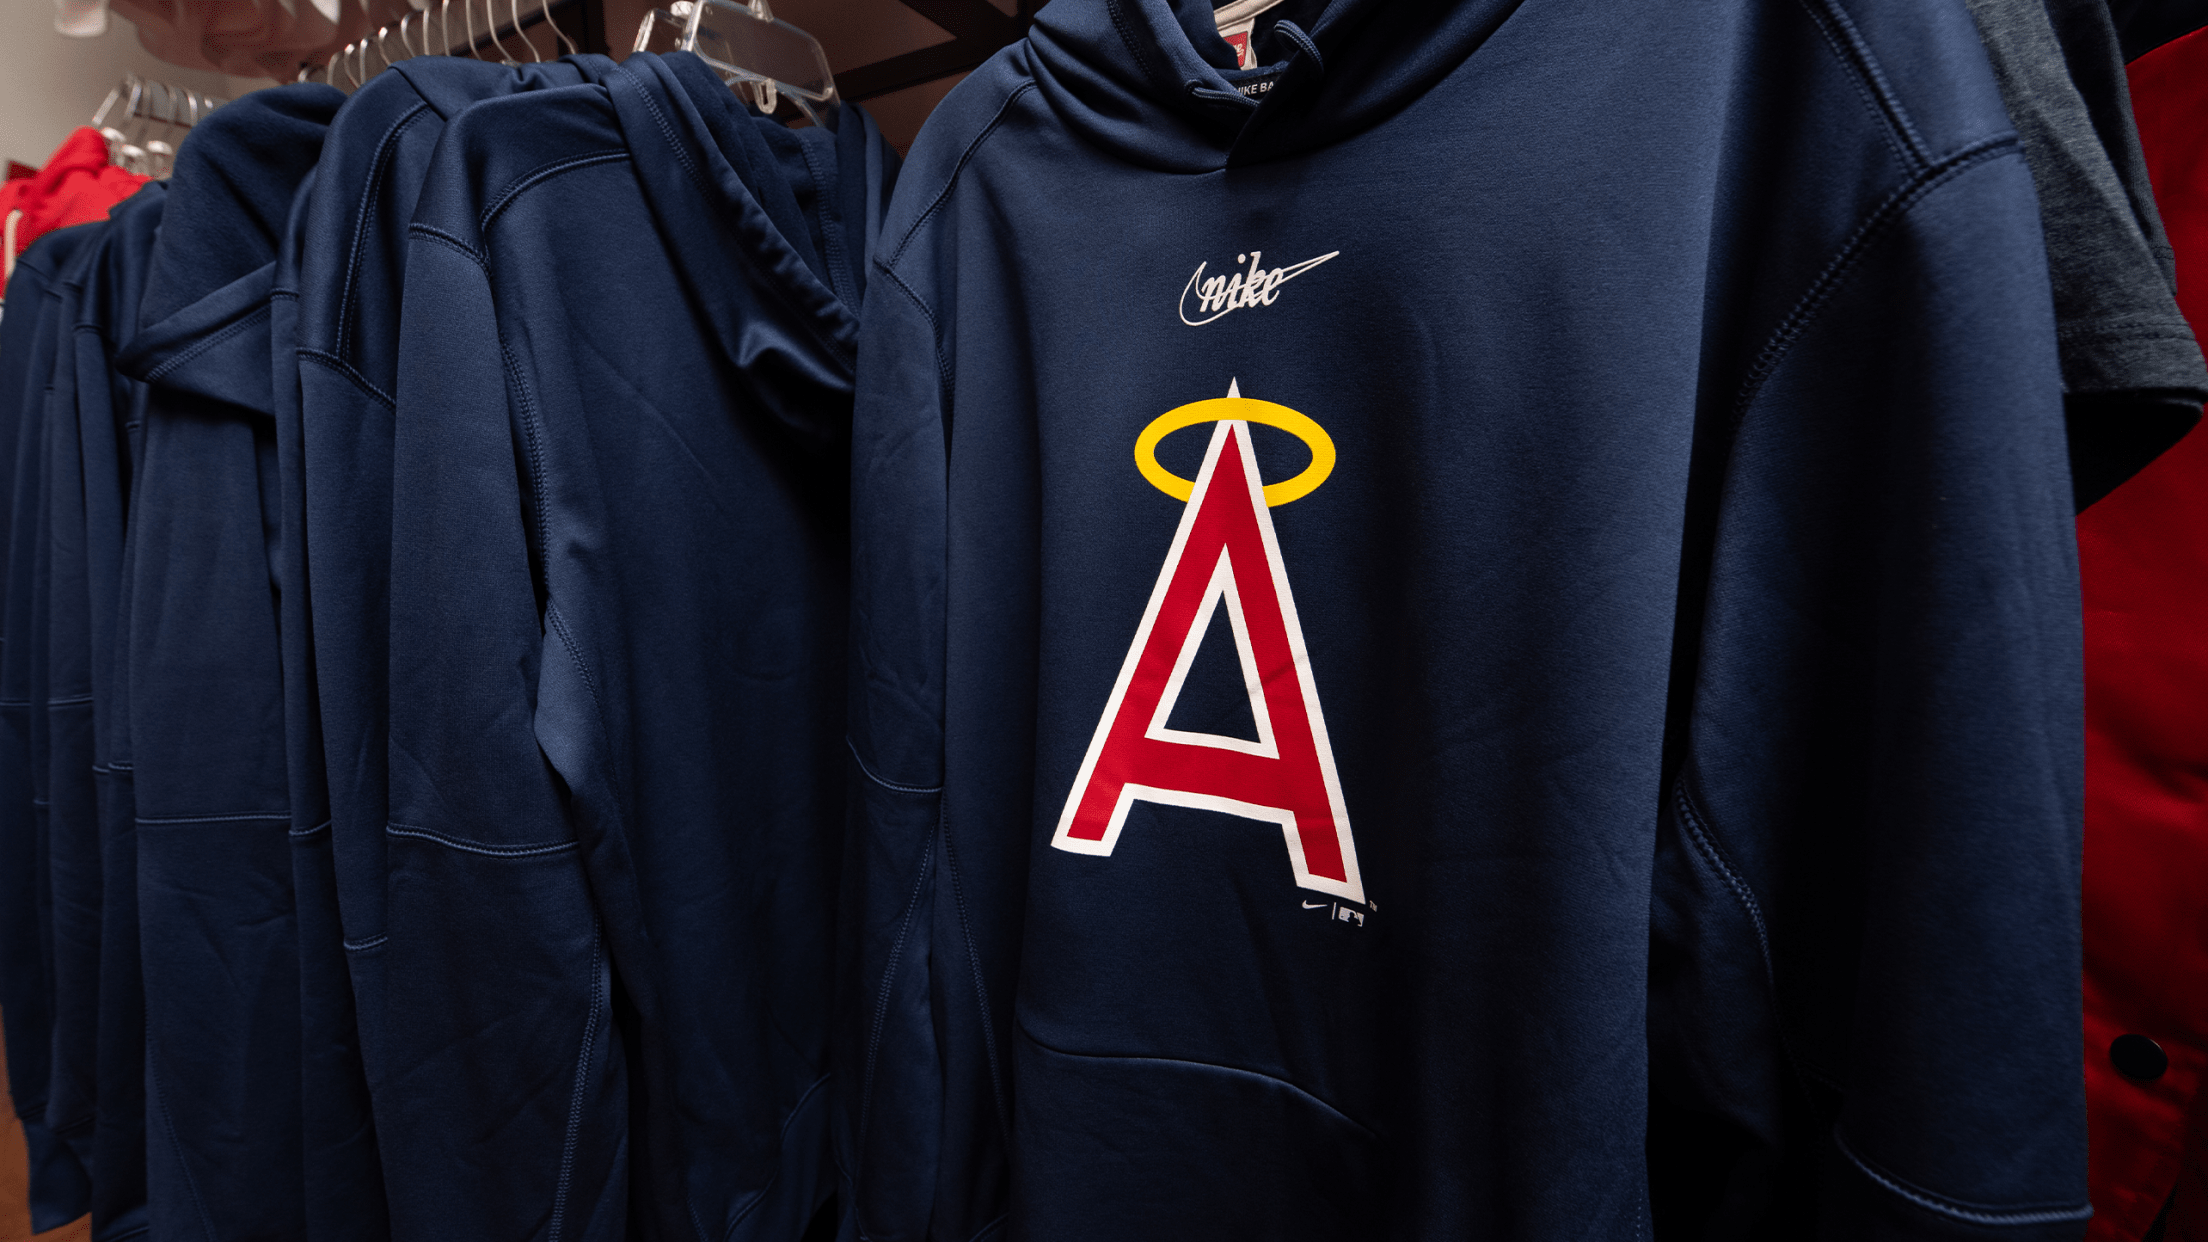 Los Angeles Angels Windbreaker with Pocket - Red